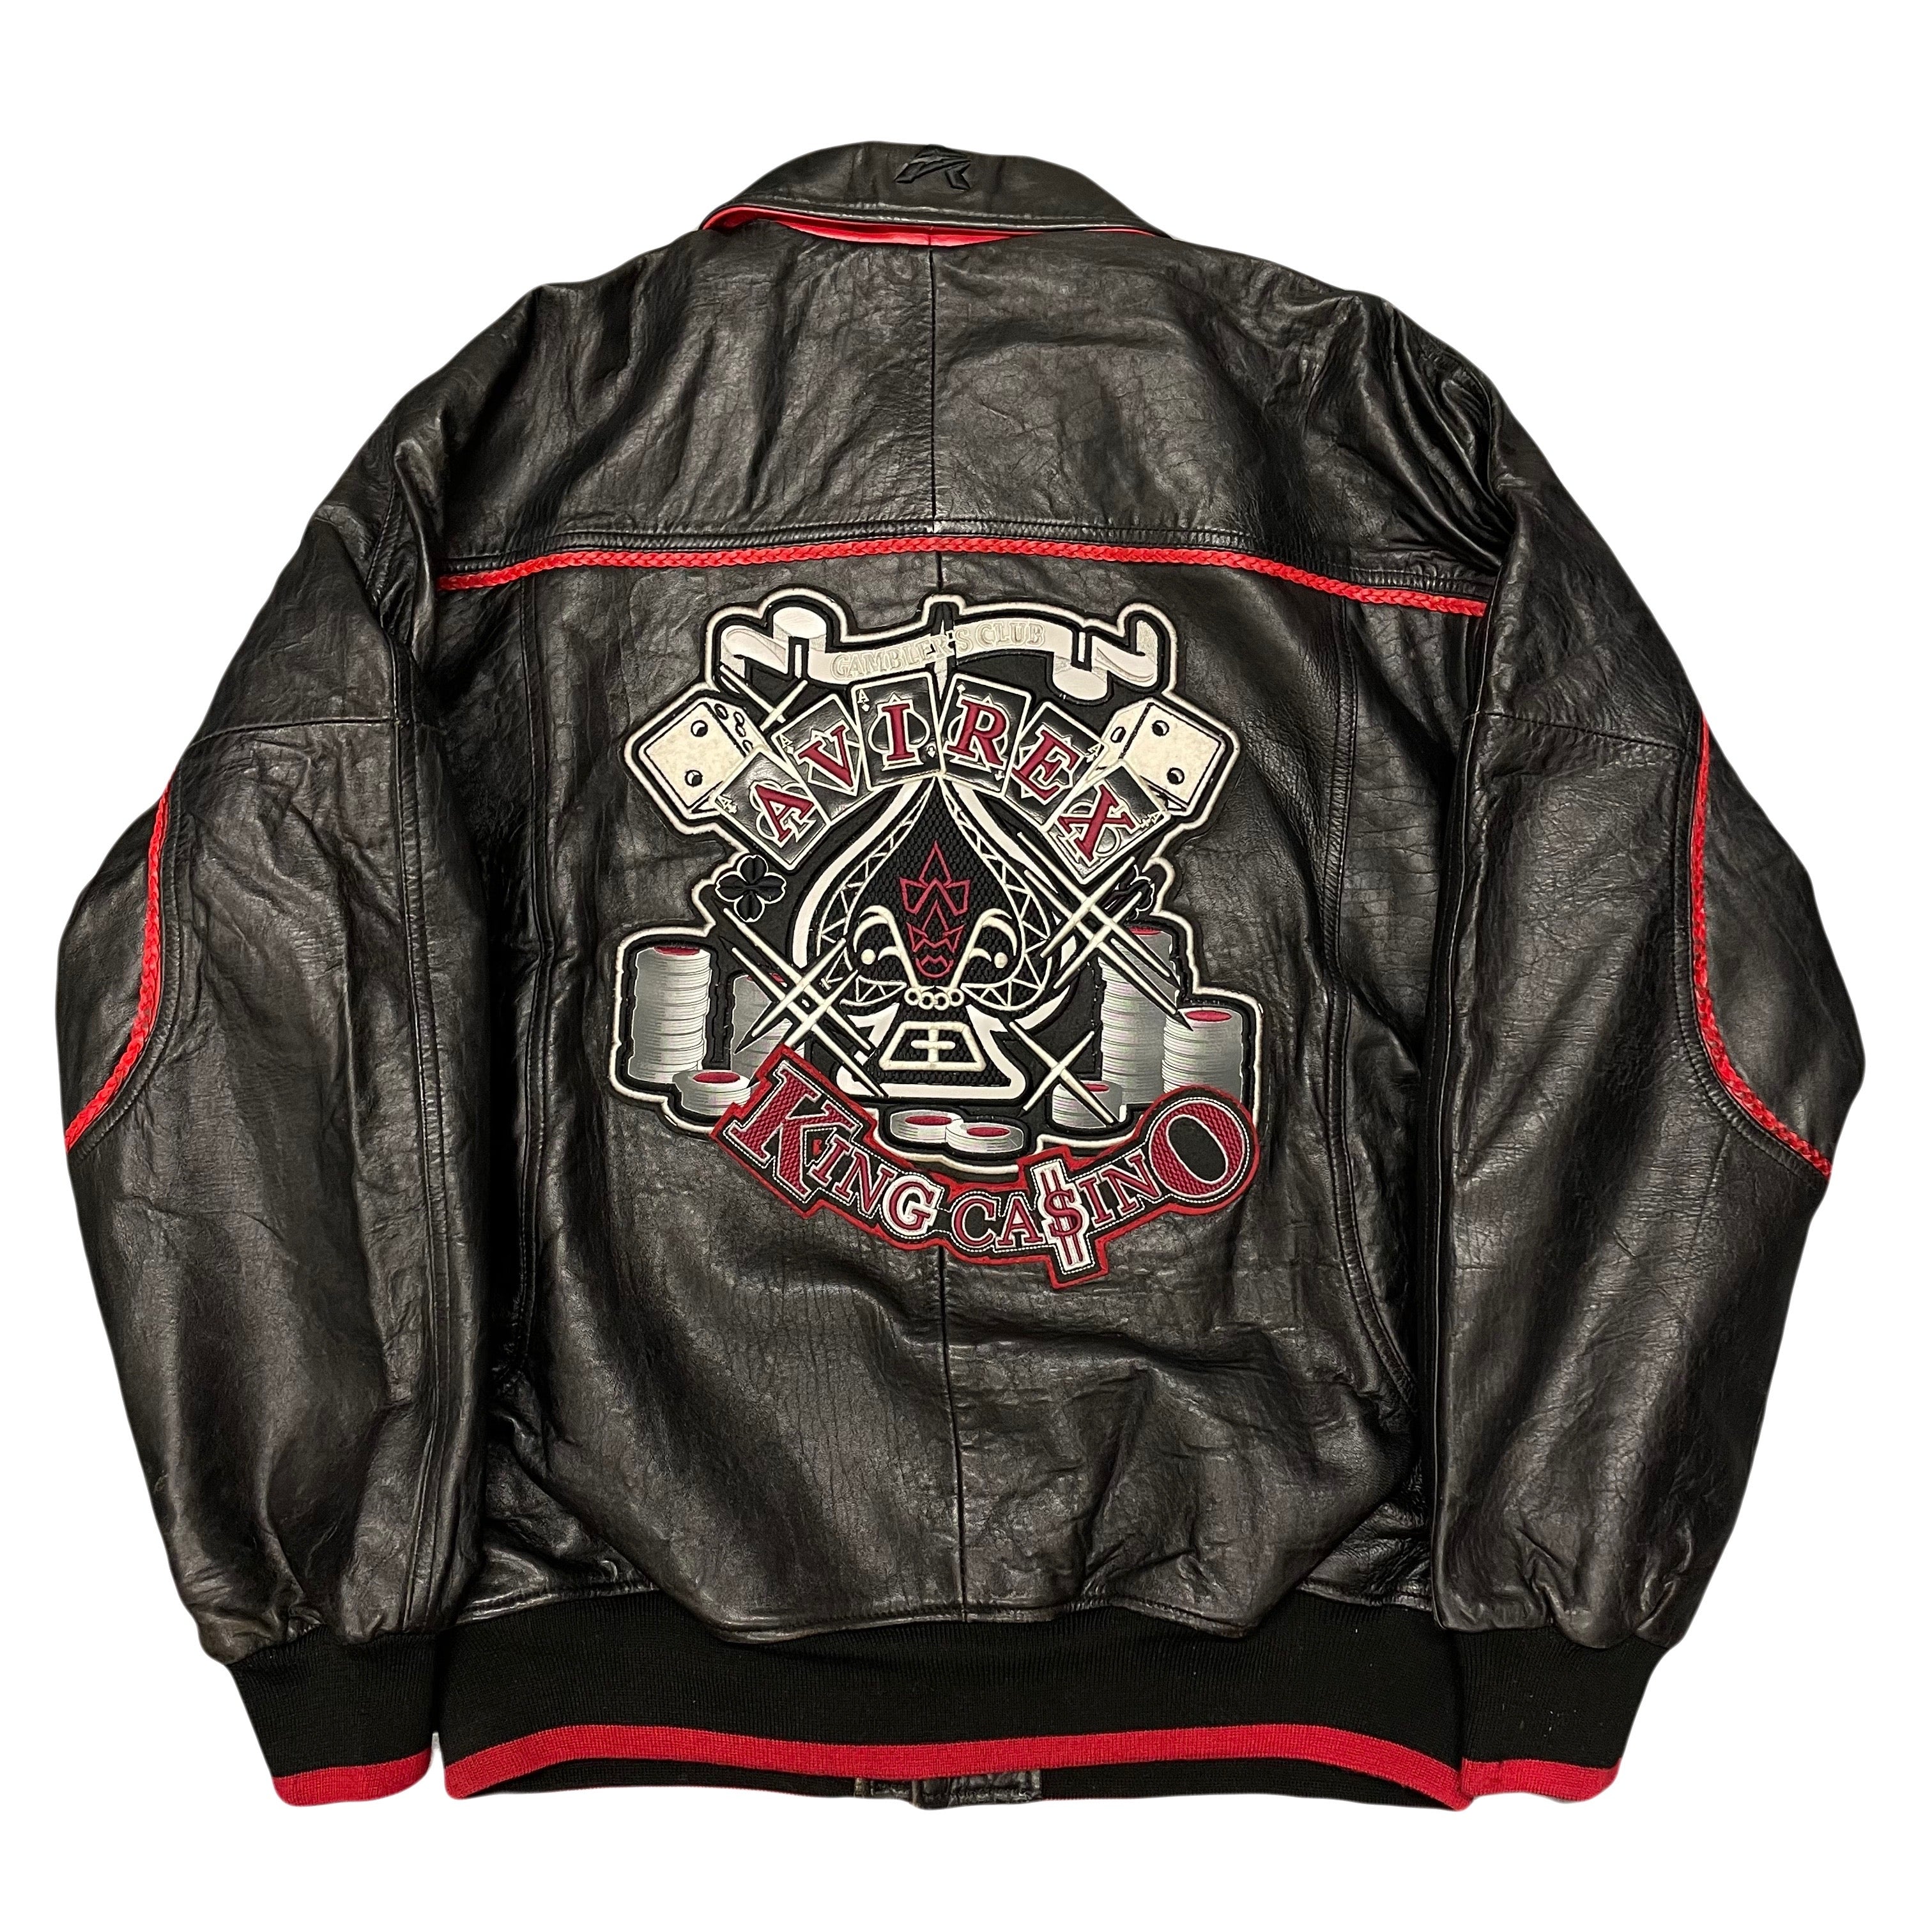 ARCHIVE Avirex ‘King Casino’ Leather Jacket In Black & Red ( XL )